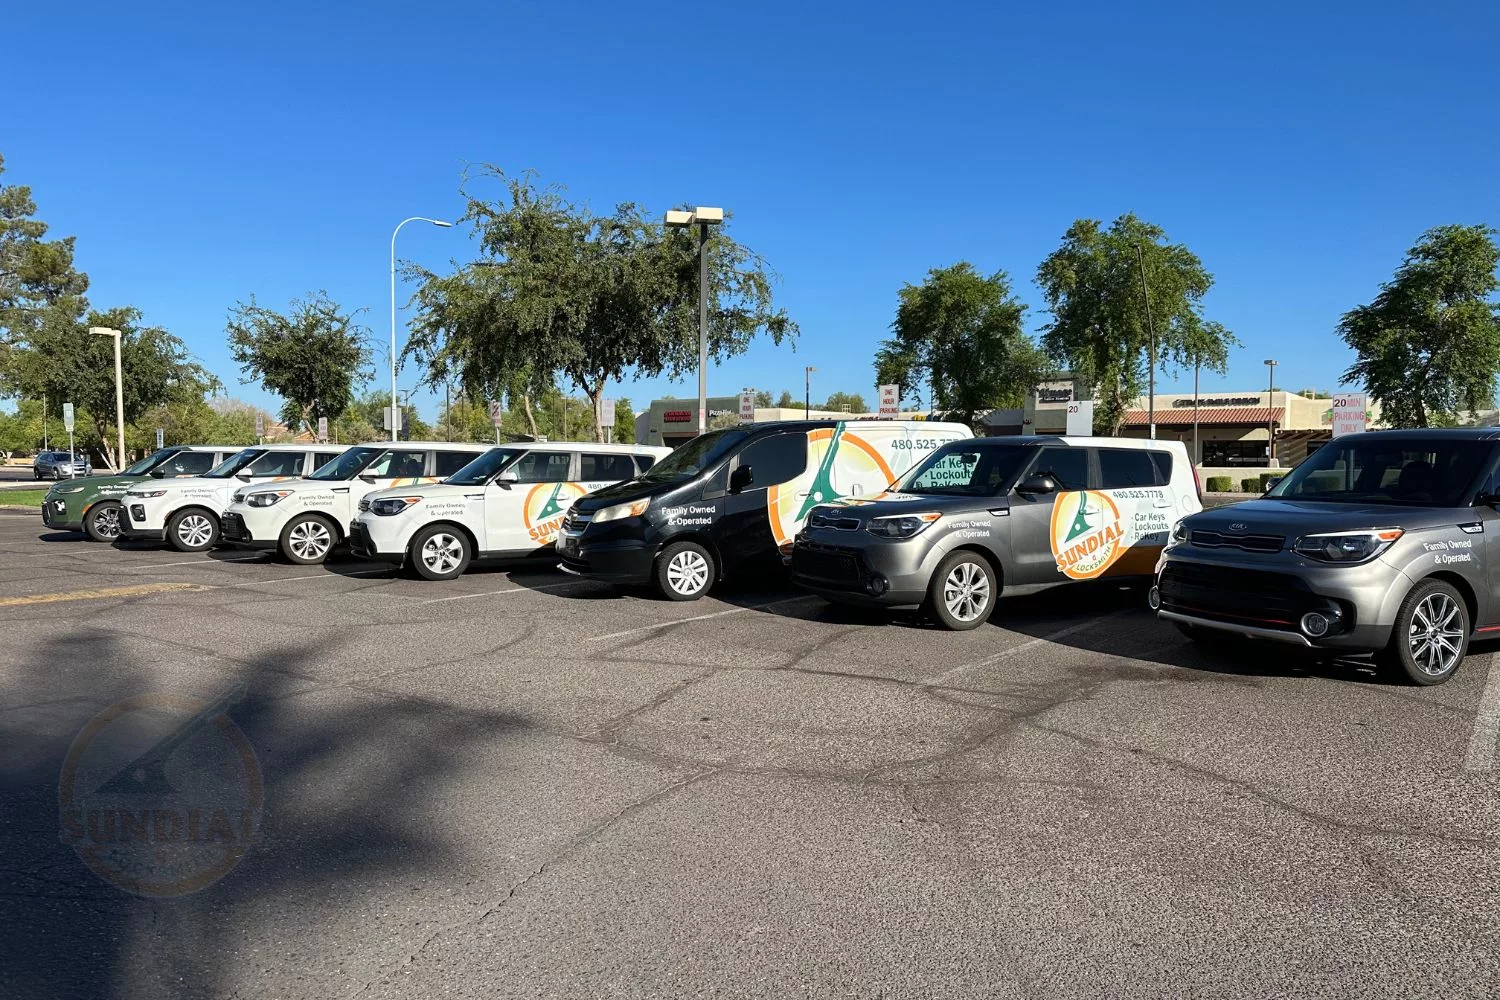 A line-up of vehicles with 'SUNDIAL LOCKSMITH' branding.